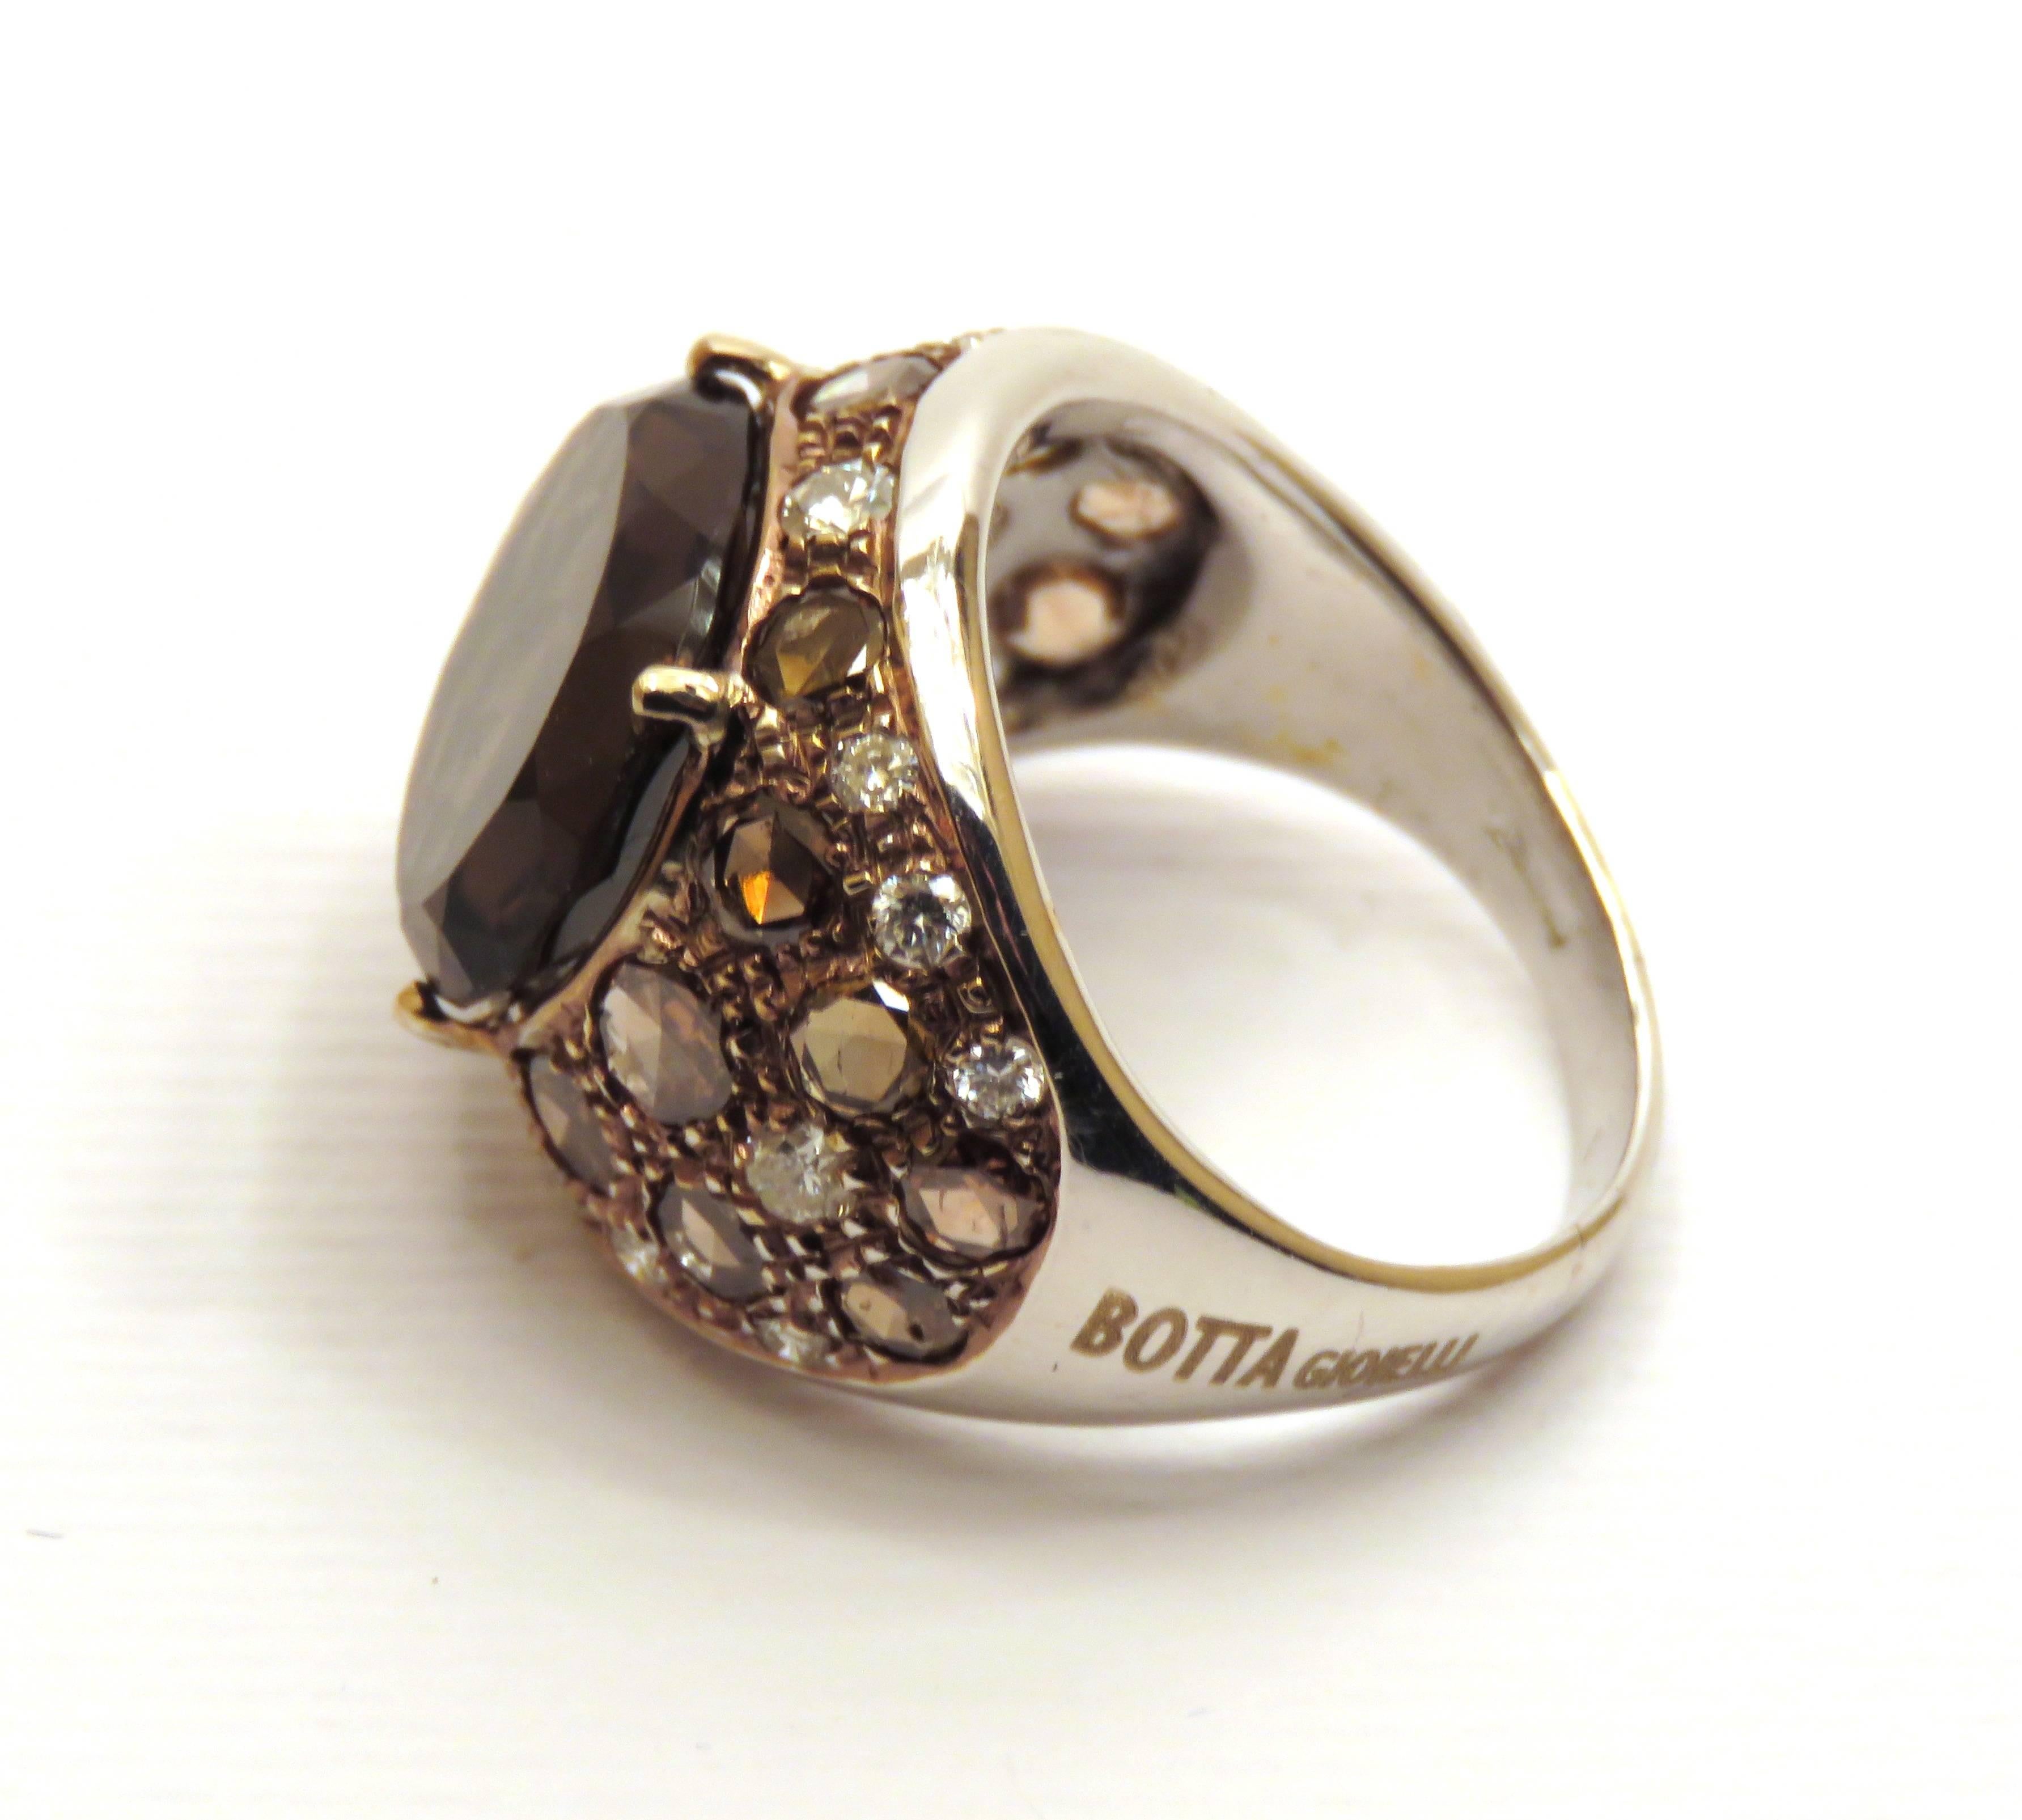 Brilliant Cut White Brown Diamonds Citrine 18 Karat Gold Cocktail Ring Handcrafted in Italy